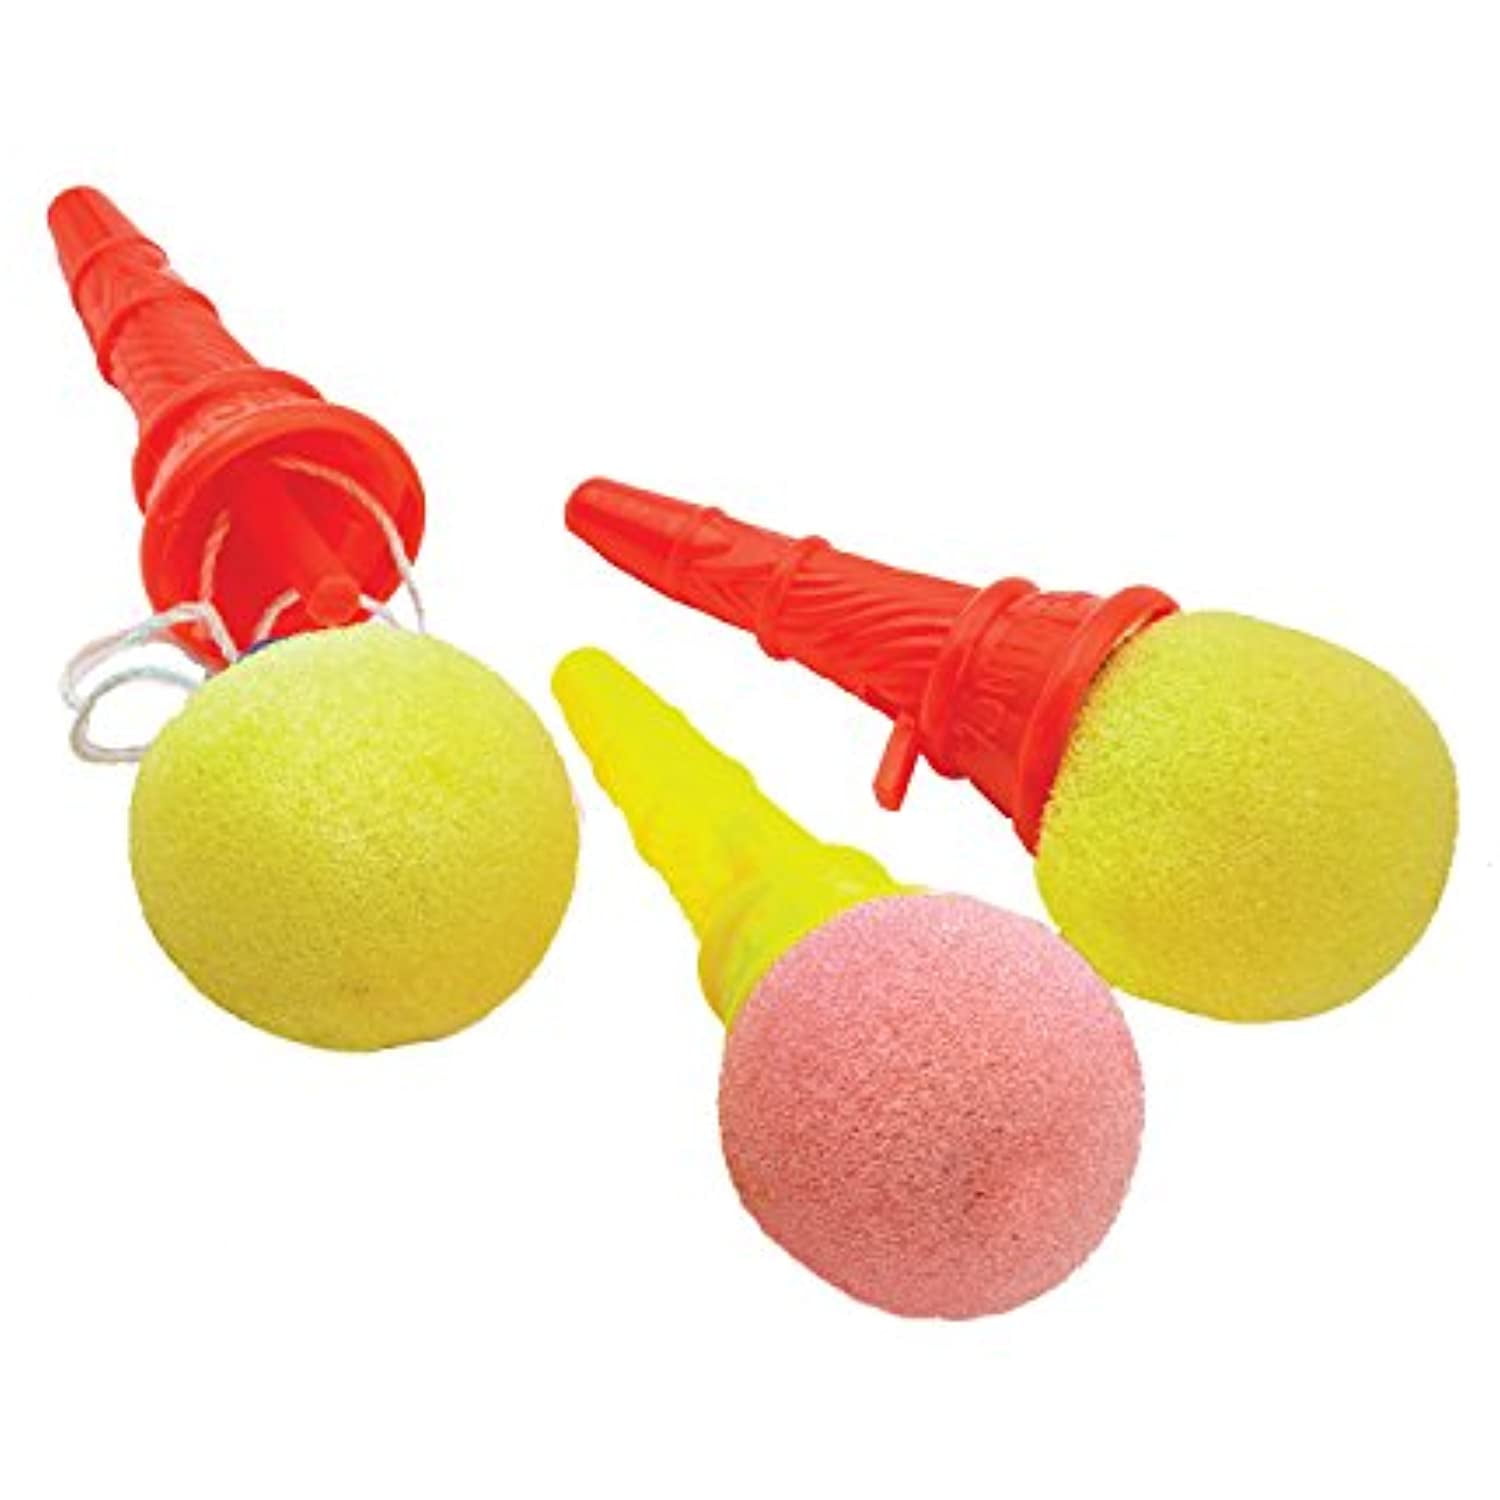 Fun Kids Party Toy Children's Game NEW Details about   Pack of 4 Ice Cream Sponge Poppers 